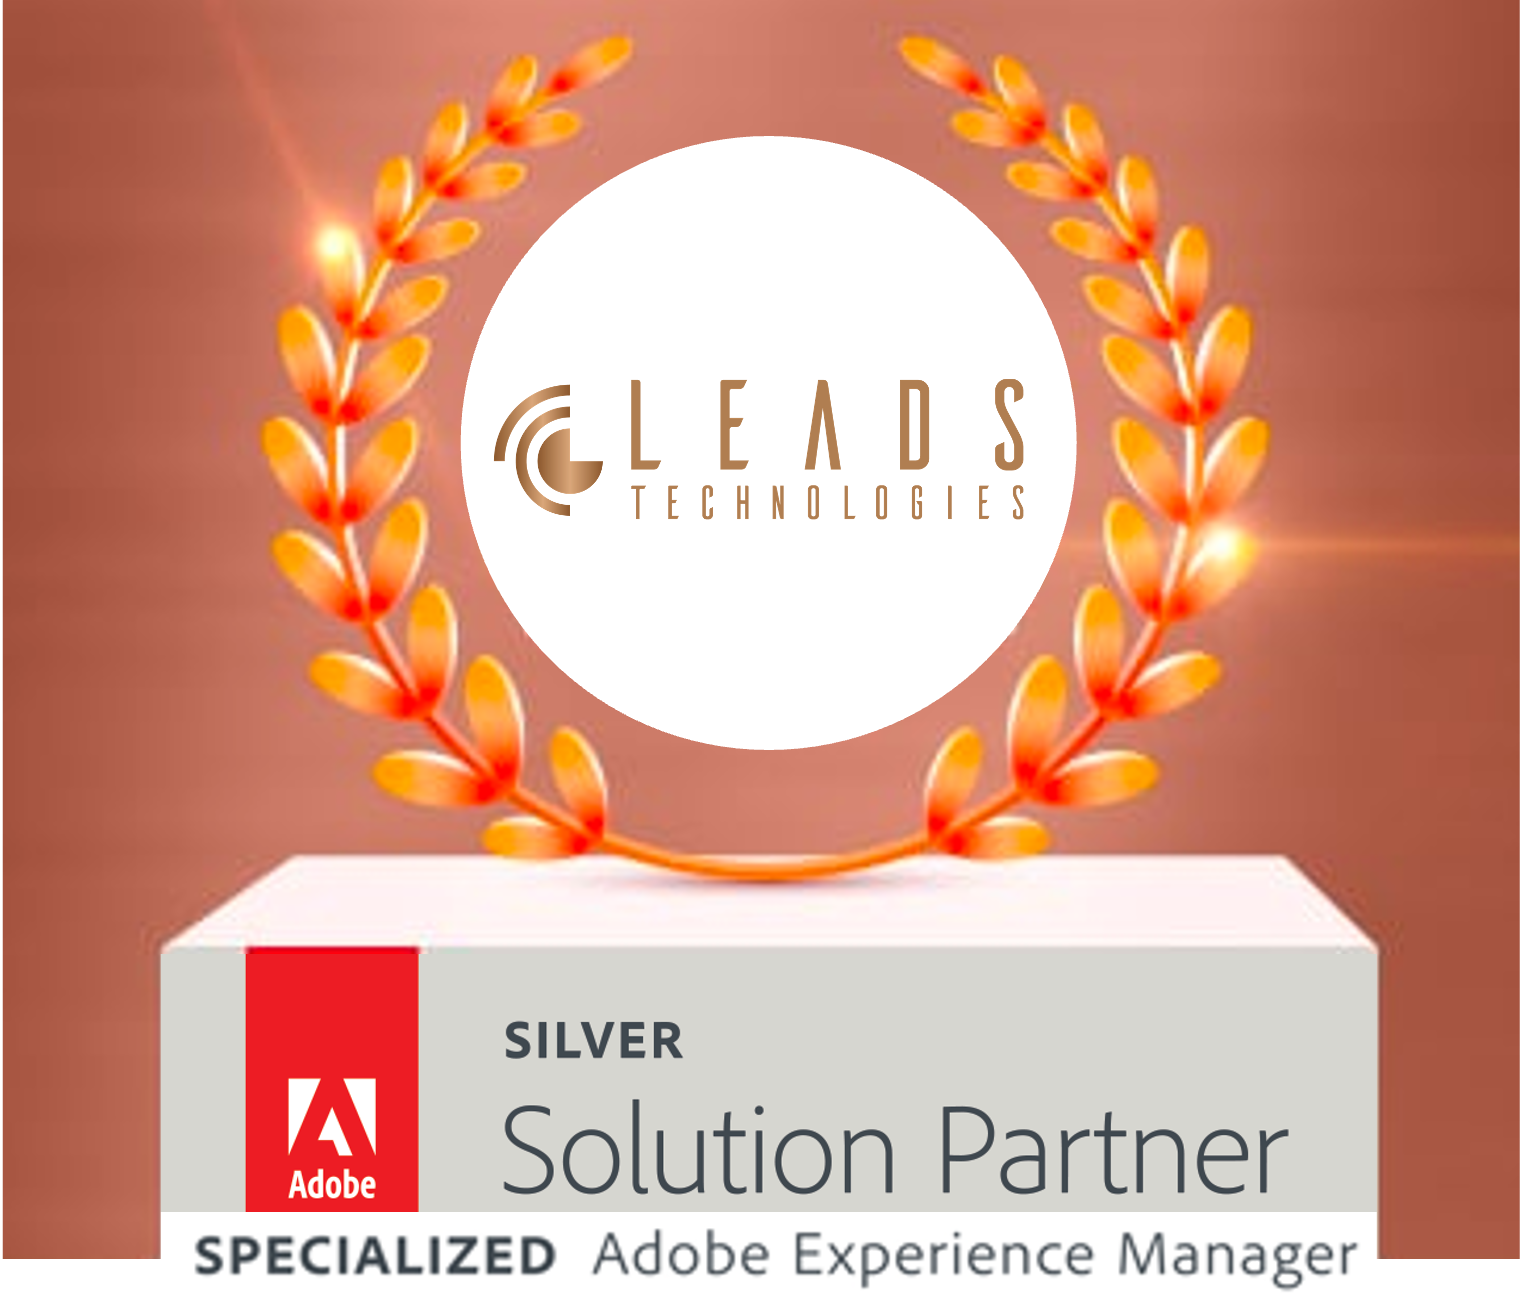 Specialized Adobe Experience Manager Leadstec 凝新科技